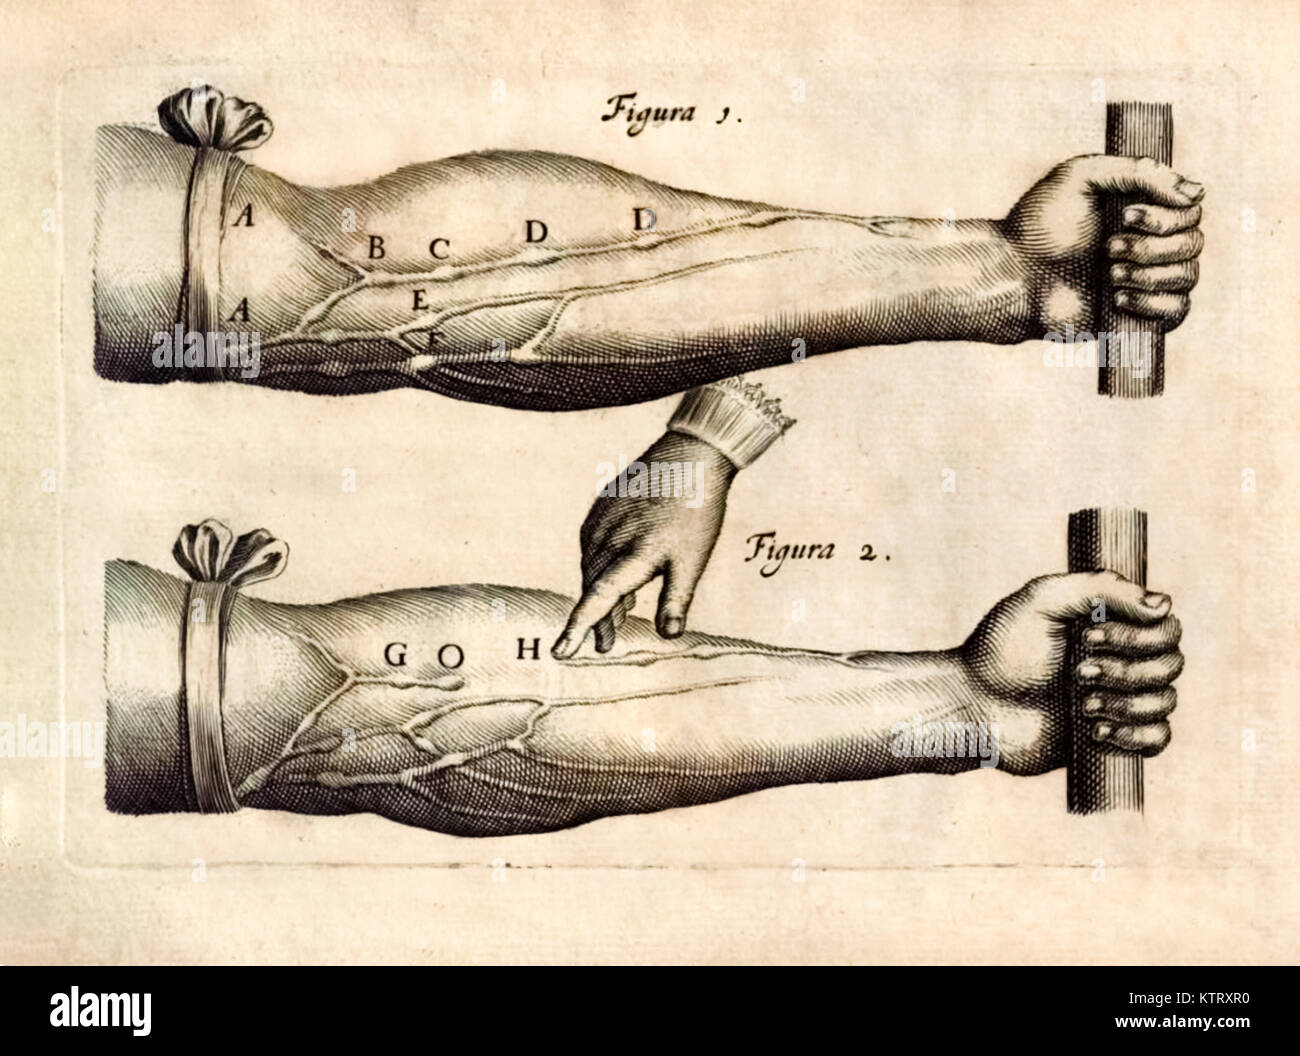 Plate 1 from ‘De Motu Cordis set Sanguinis in Animalibus’ (The Motion of the Heart and Blood in Living Beings) by William Harvey (1578-1657) showing the network of veins in the forearm containing one way valves. See more information below. Stock Photo